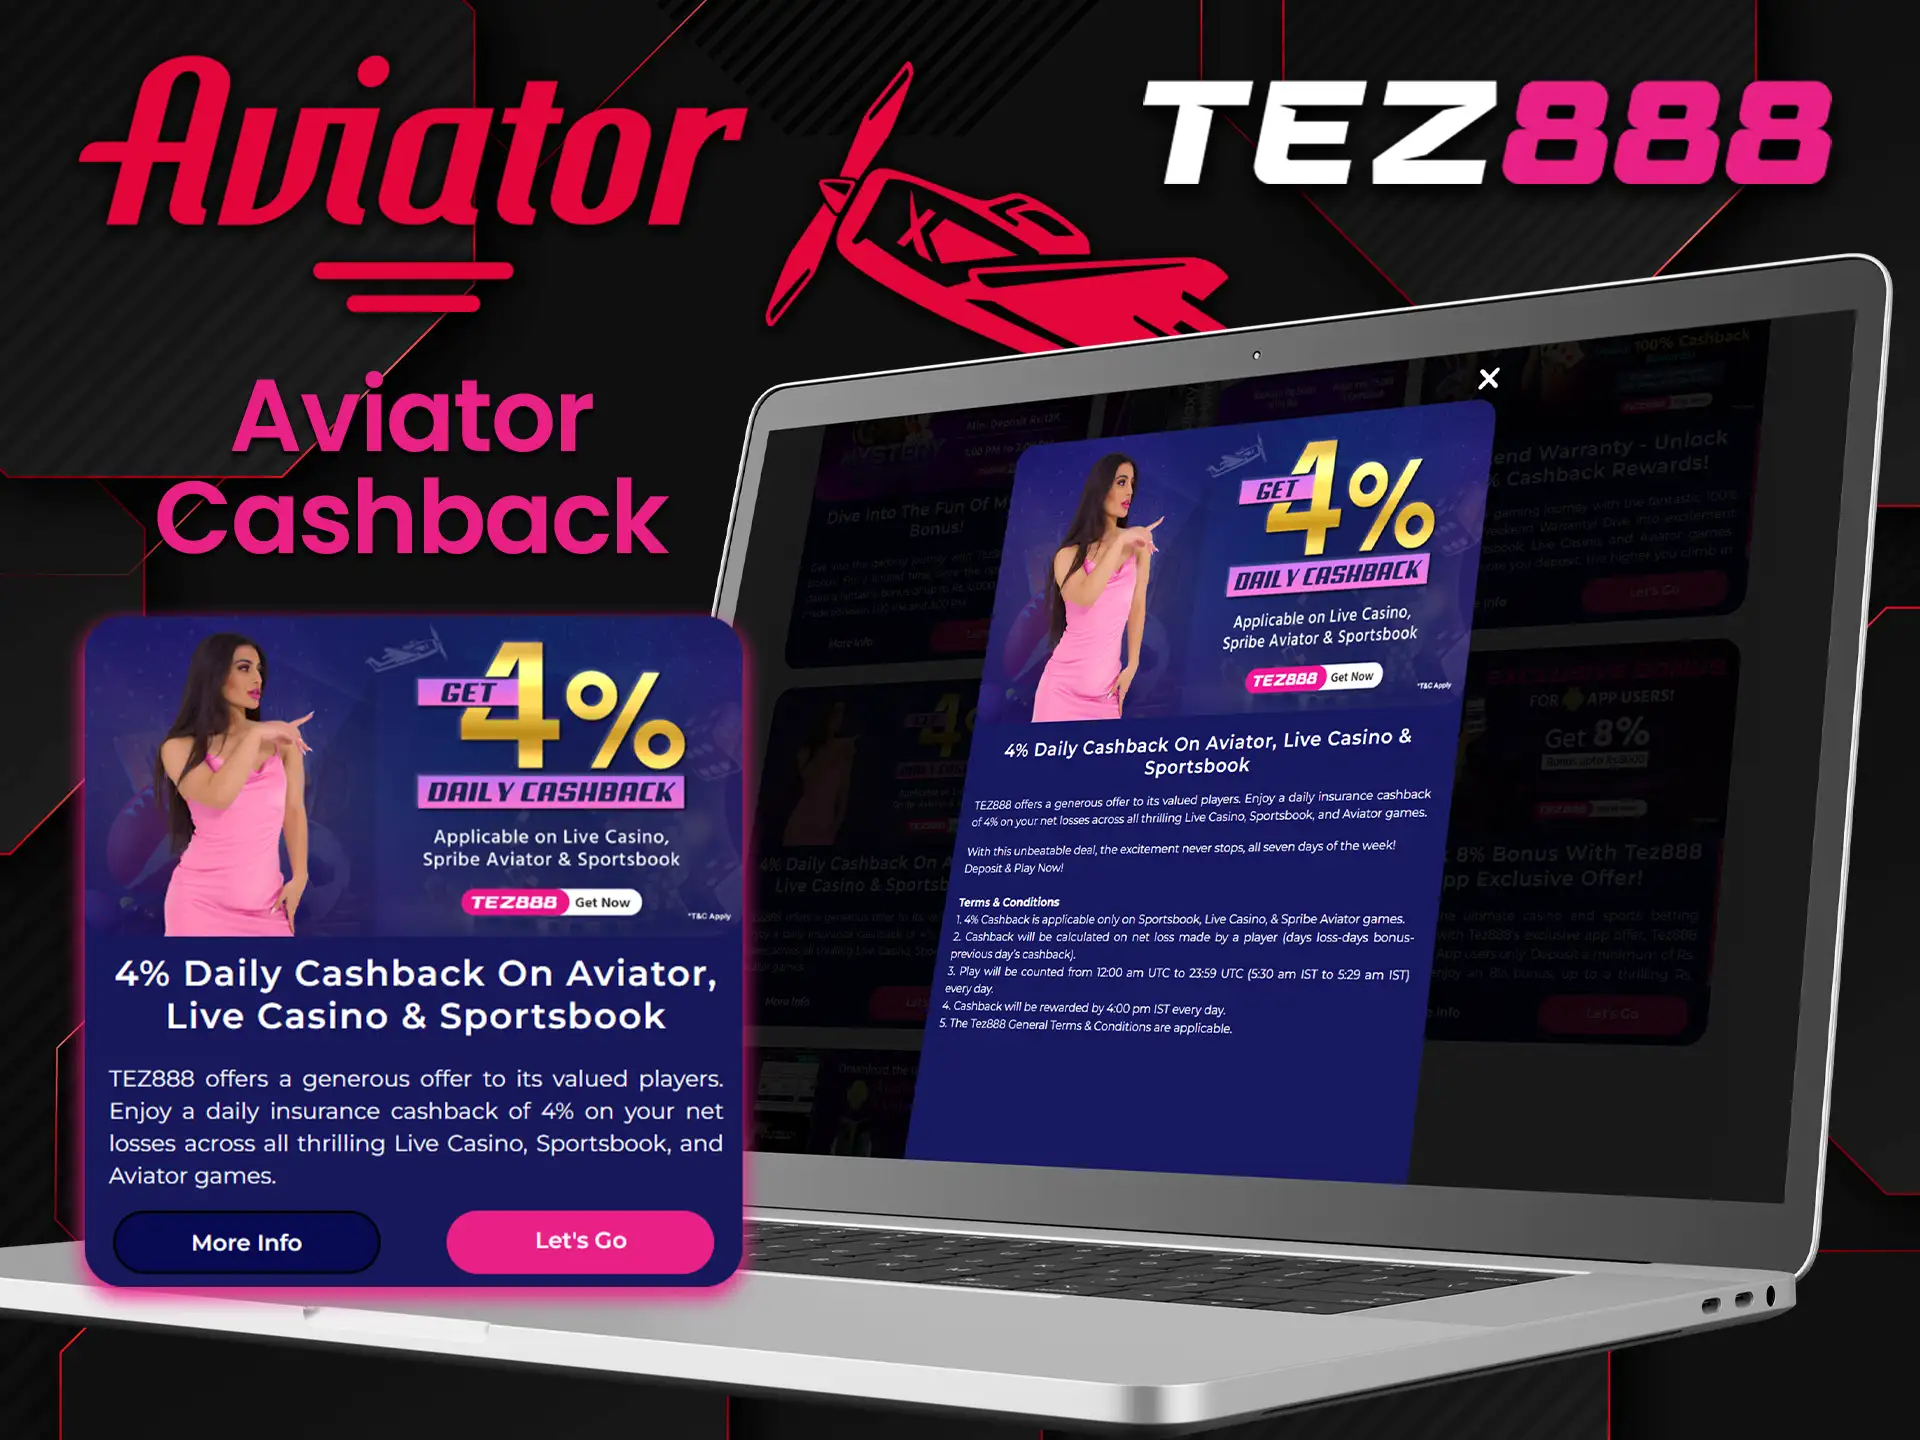 Tez888 offers a cashback bonus from net losses at Aviator.